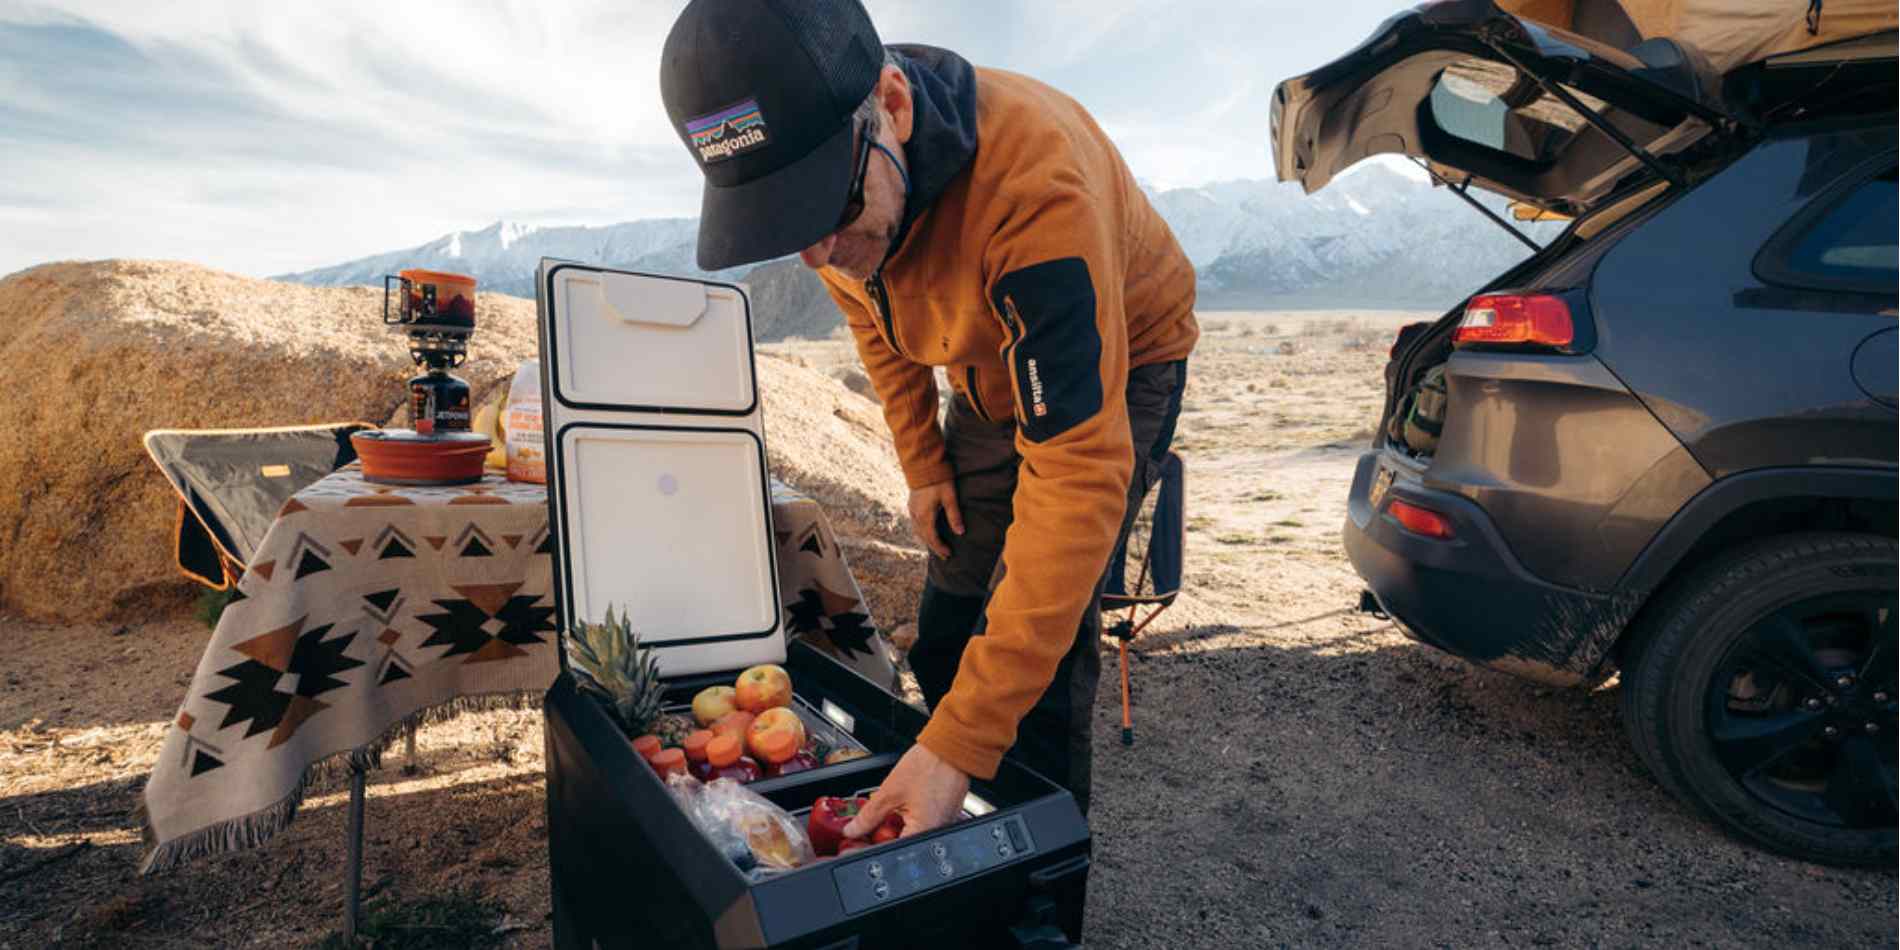 A man takes fruits out of a BougeRV 12V electric car cooler while camping with his car